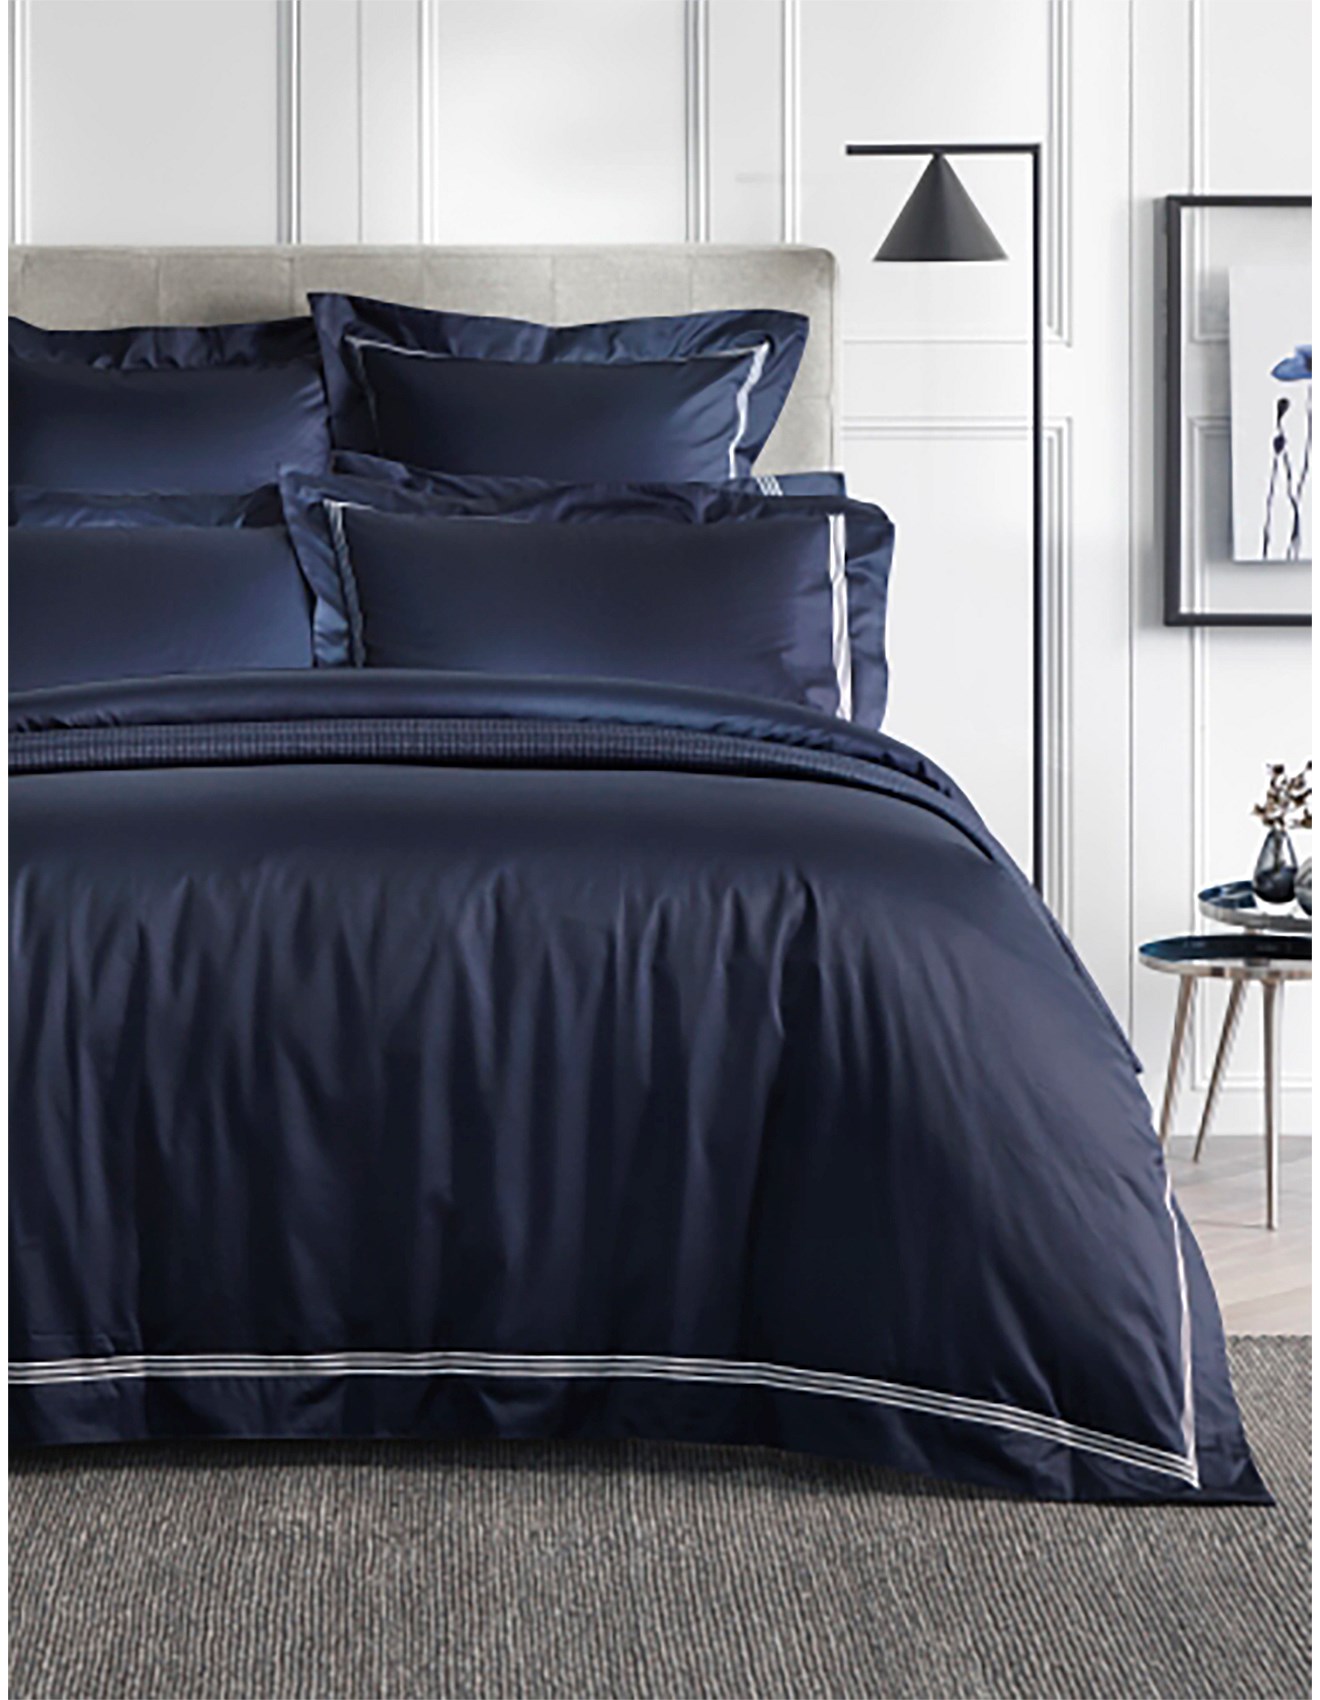 Sheridan PALAIS LUX KING QUILT COVER